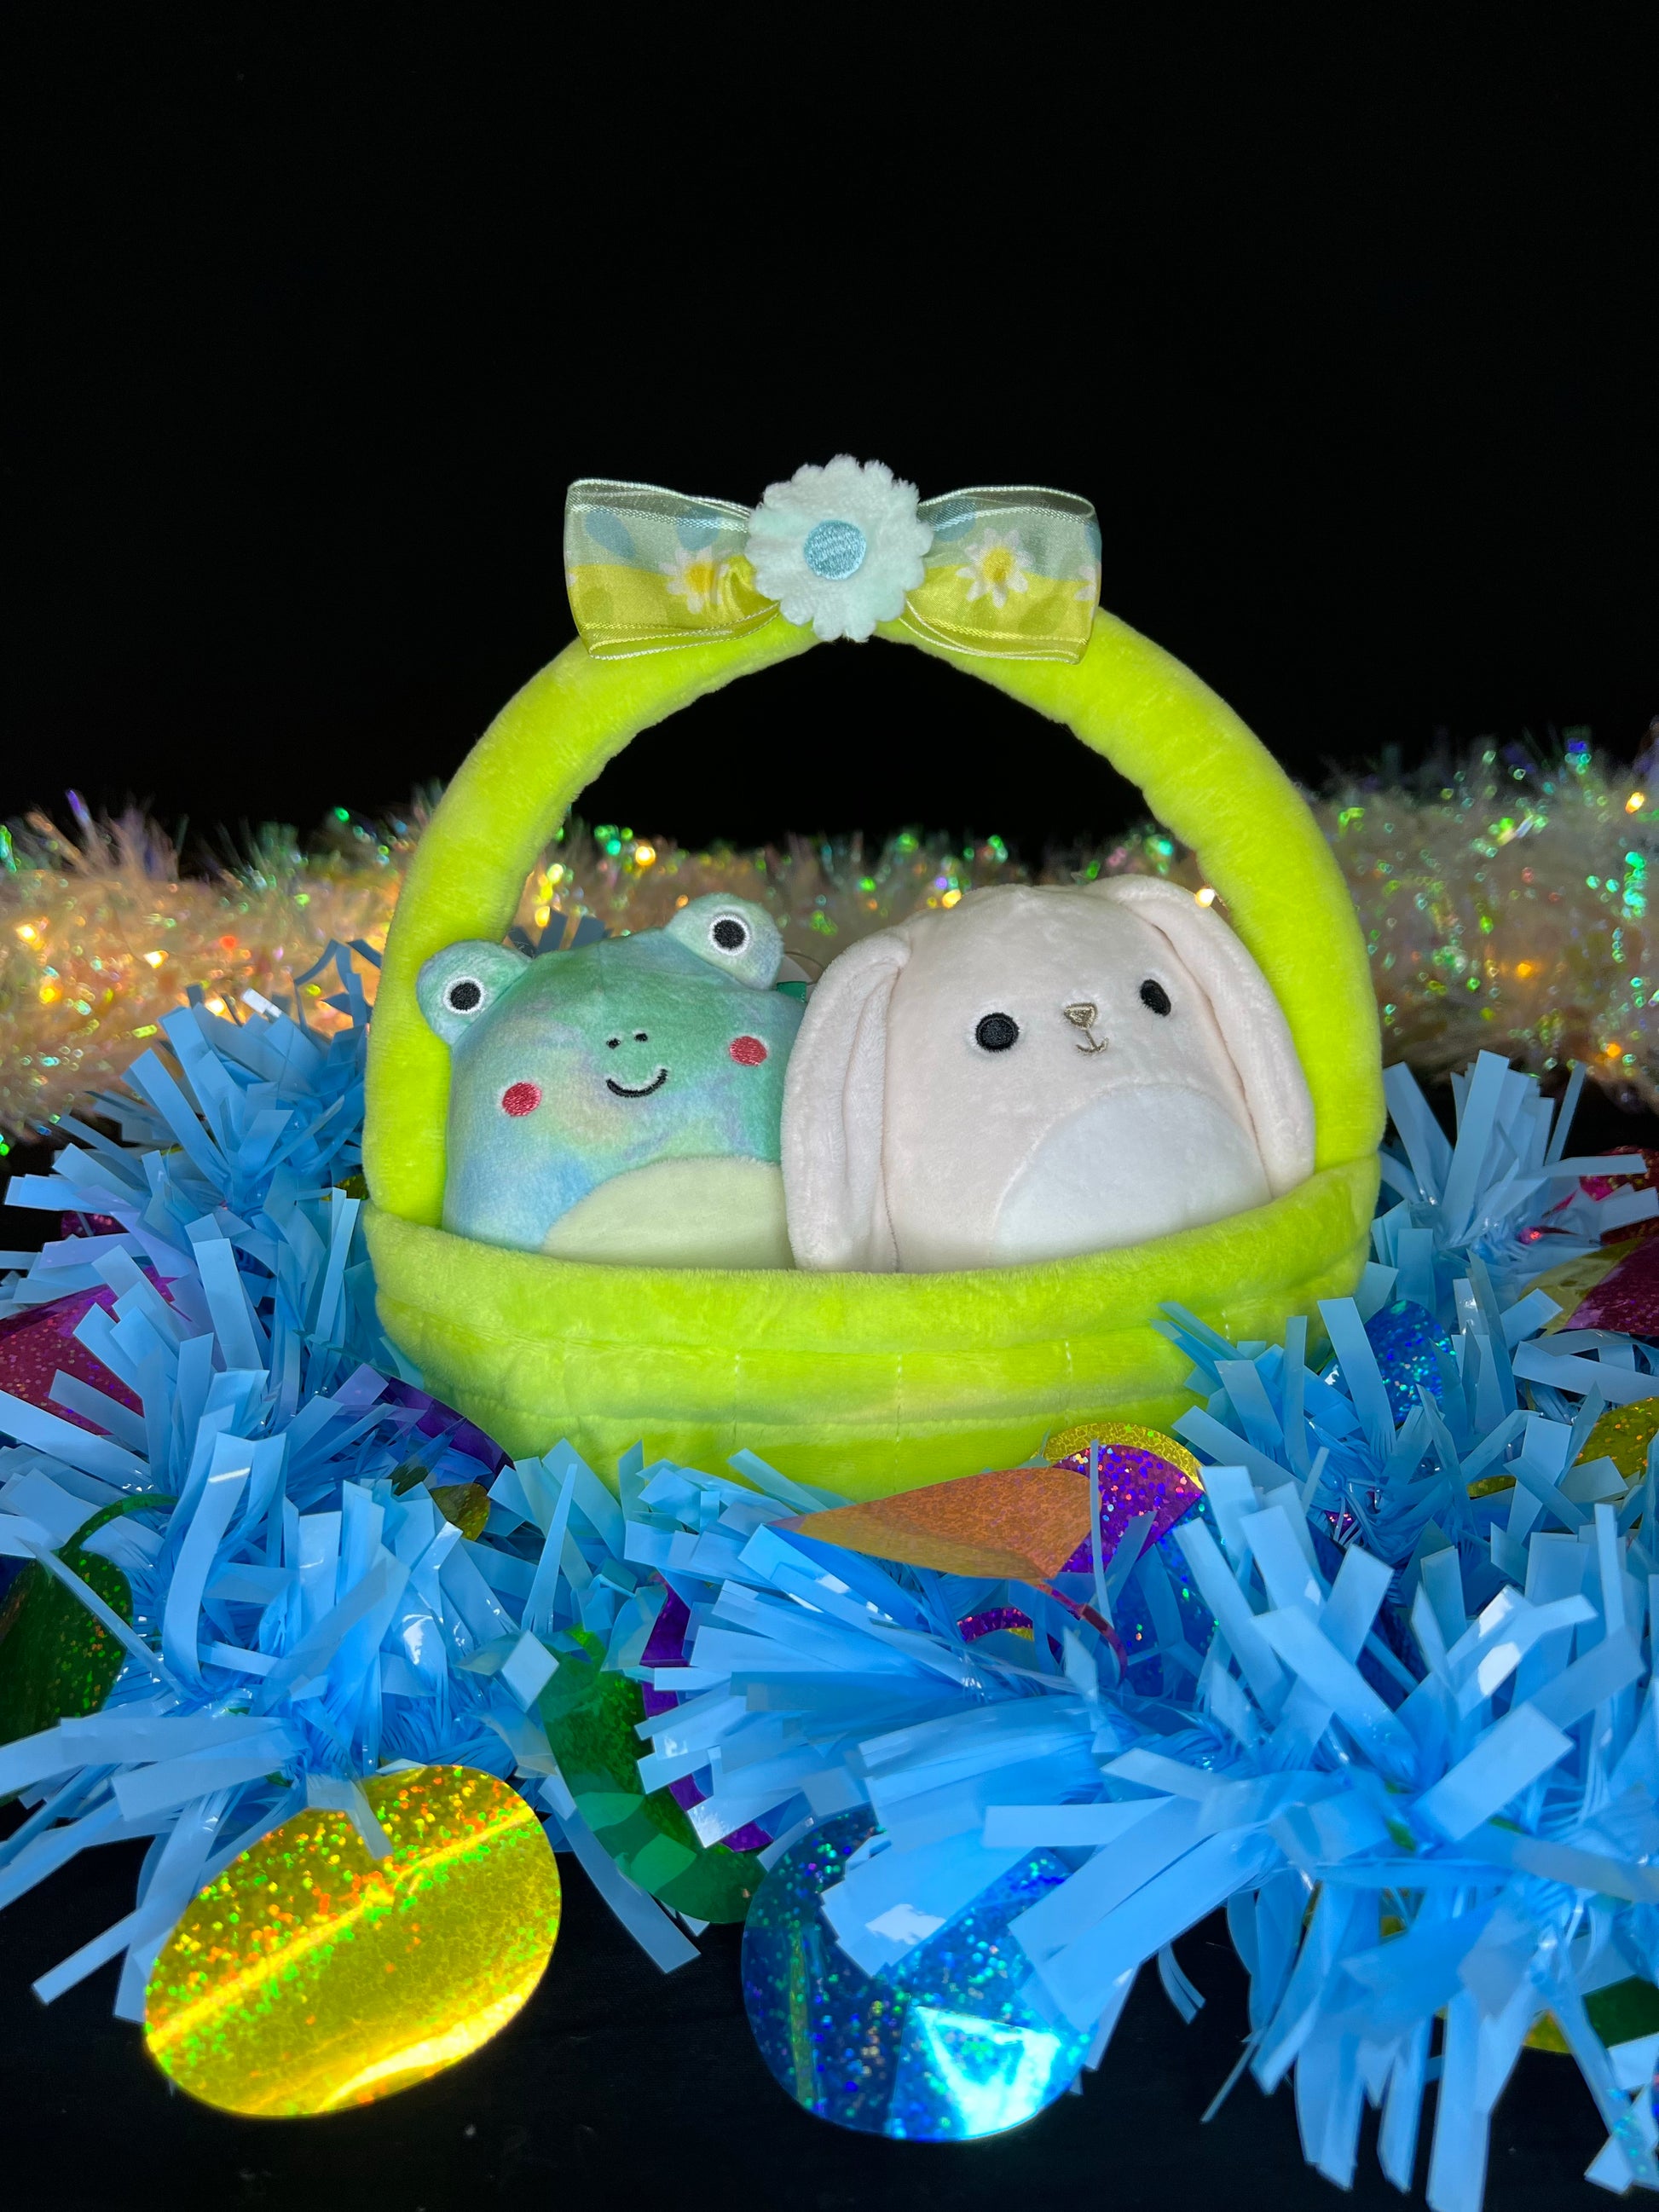 Squishmallow Easter Basket Ferdie the Frog and Valentina the Bunny.